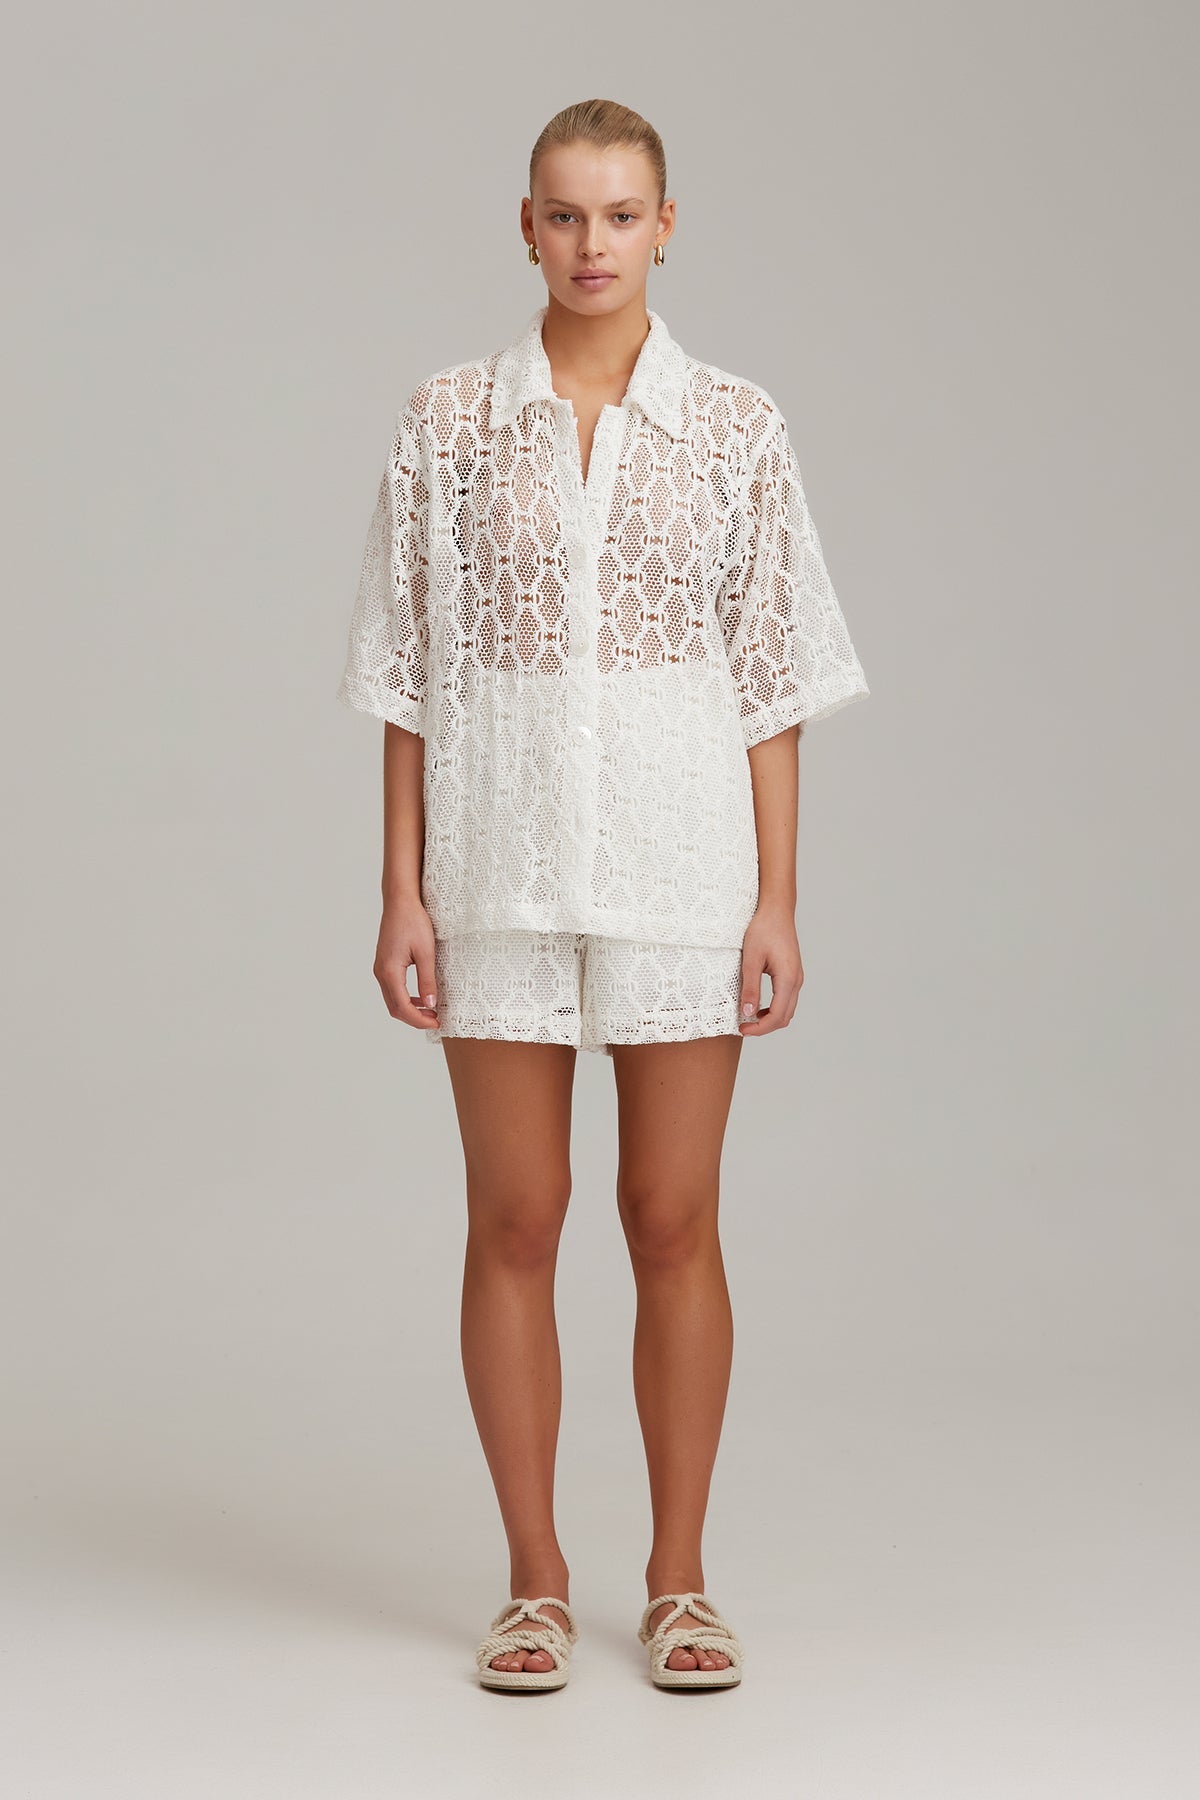 C/MEO Collective - Melodrama Shirt - White